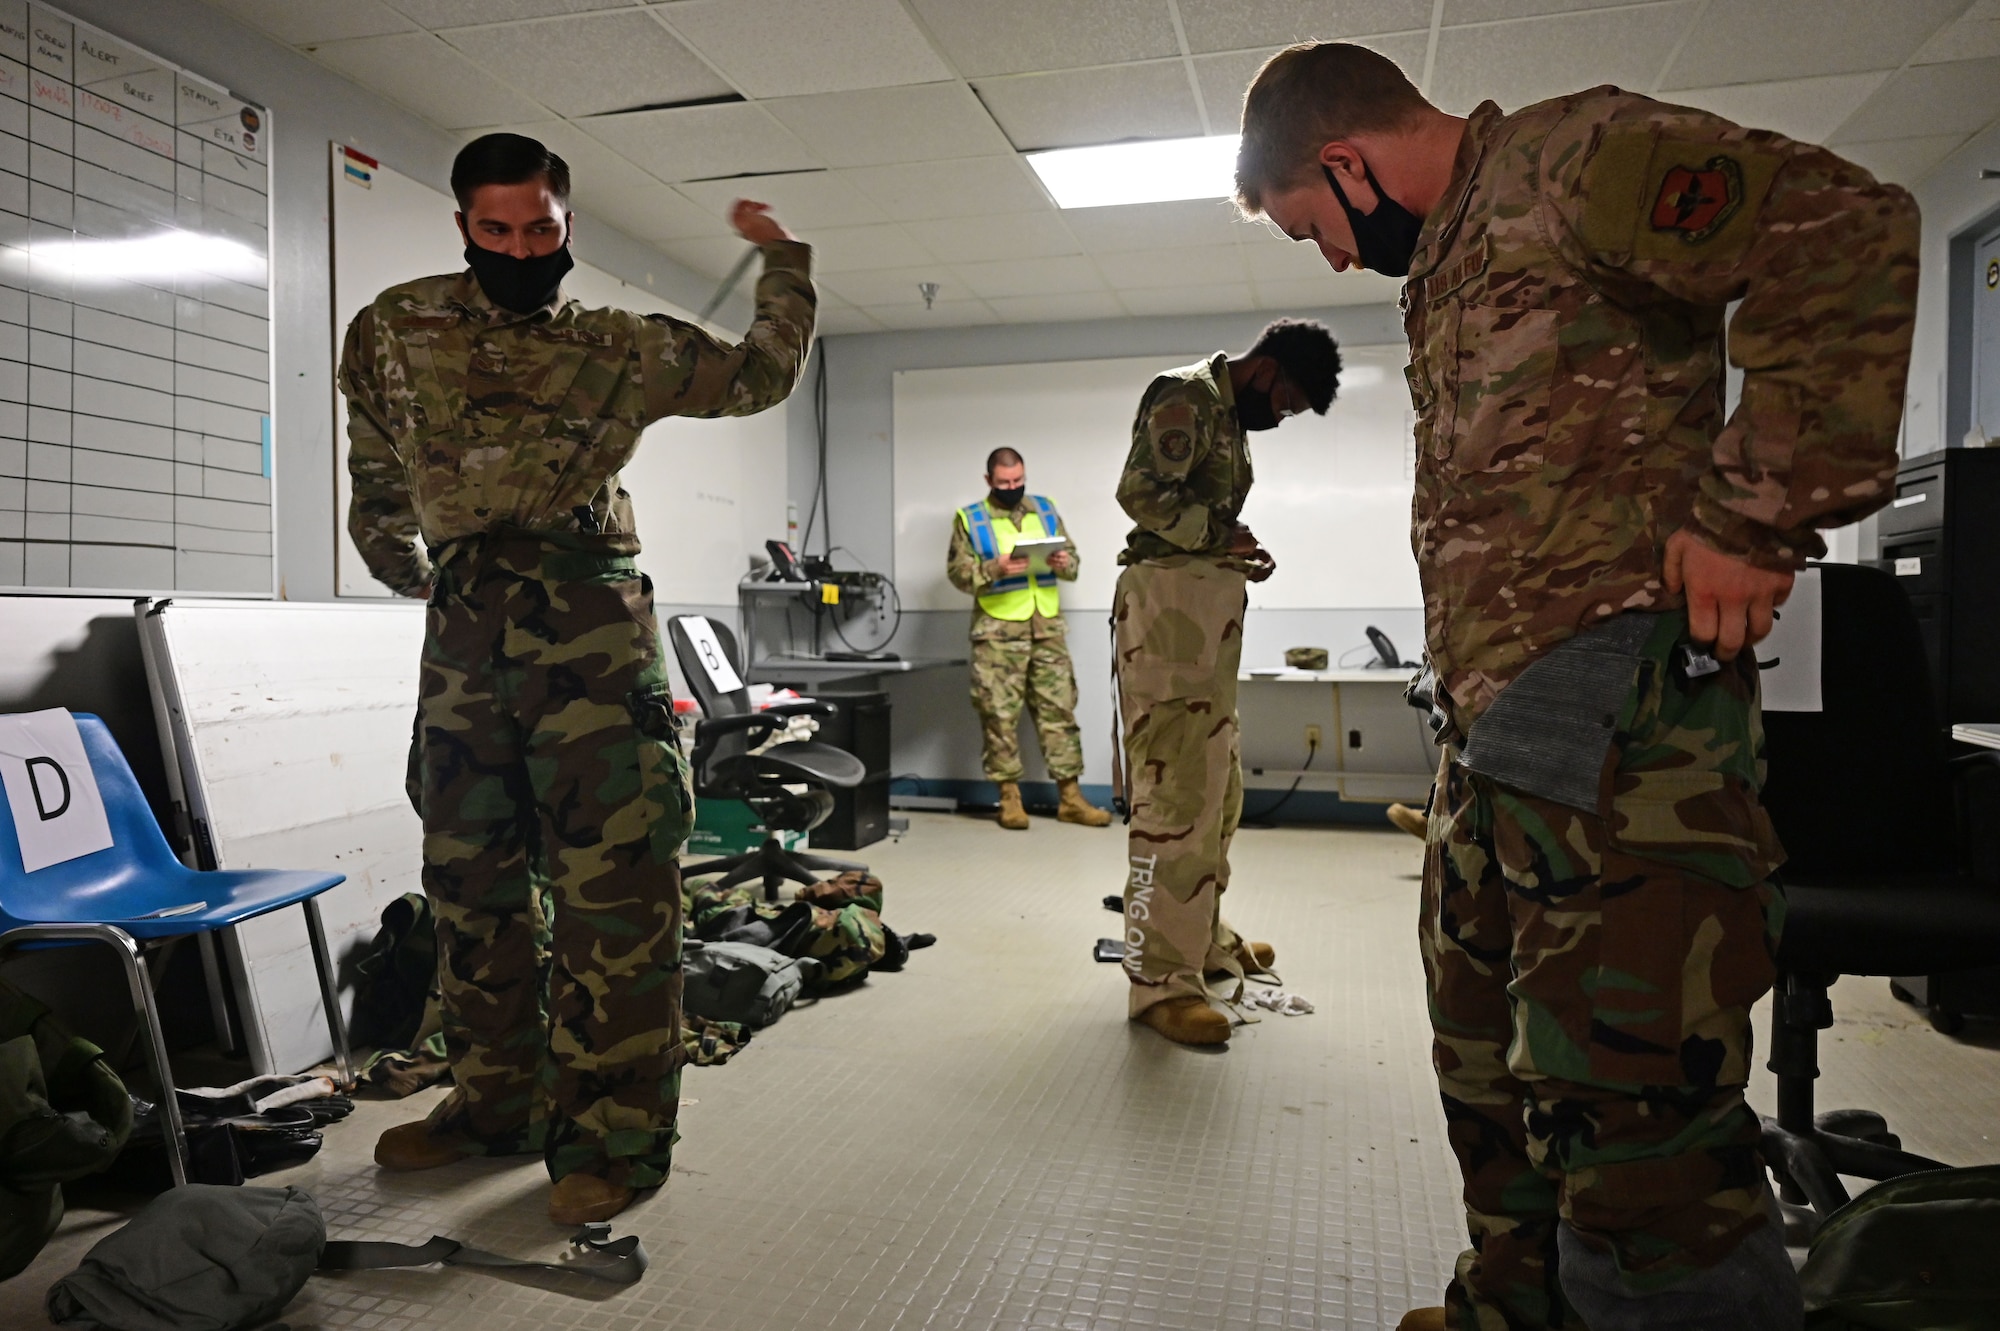 Airmen put on mopp gear during an exercise.